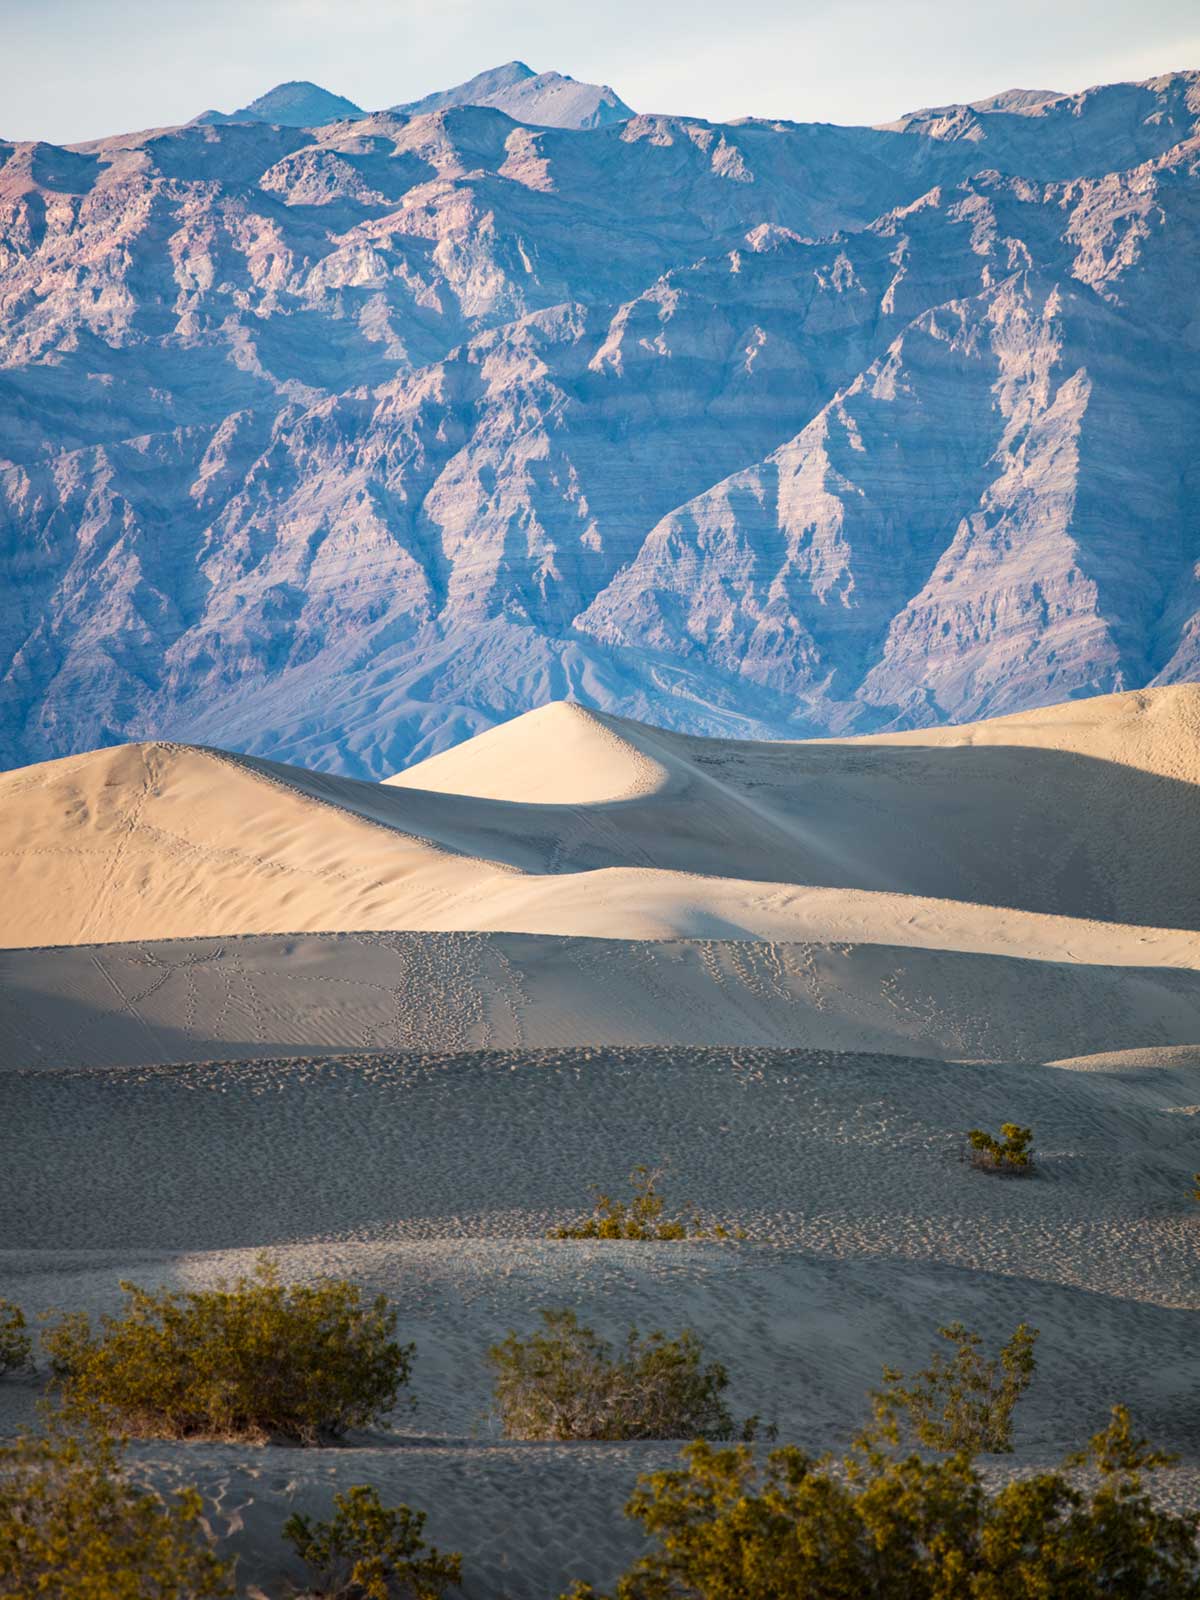 “Mesquite Sand Dunes” at f/5.6 1/160 ISO100 @ 300mm.